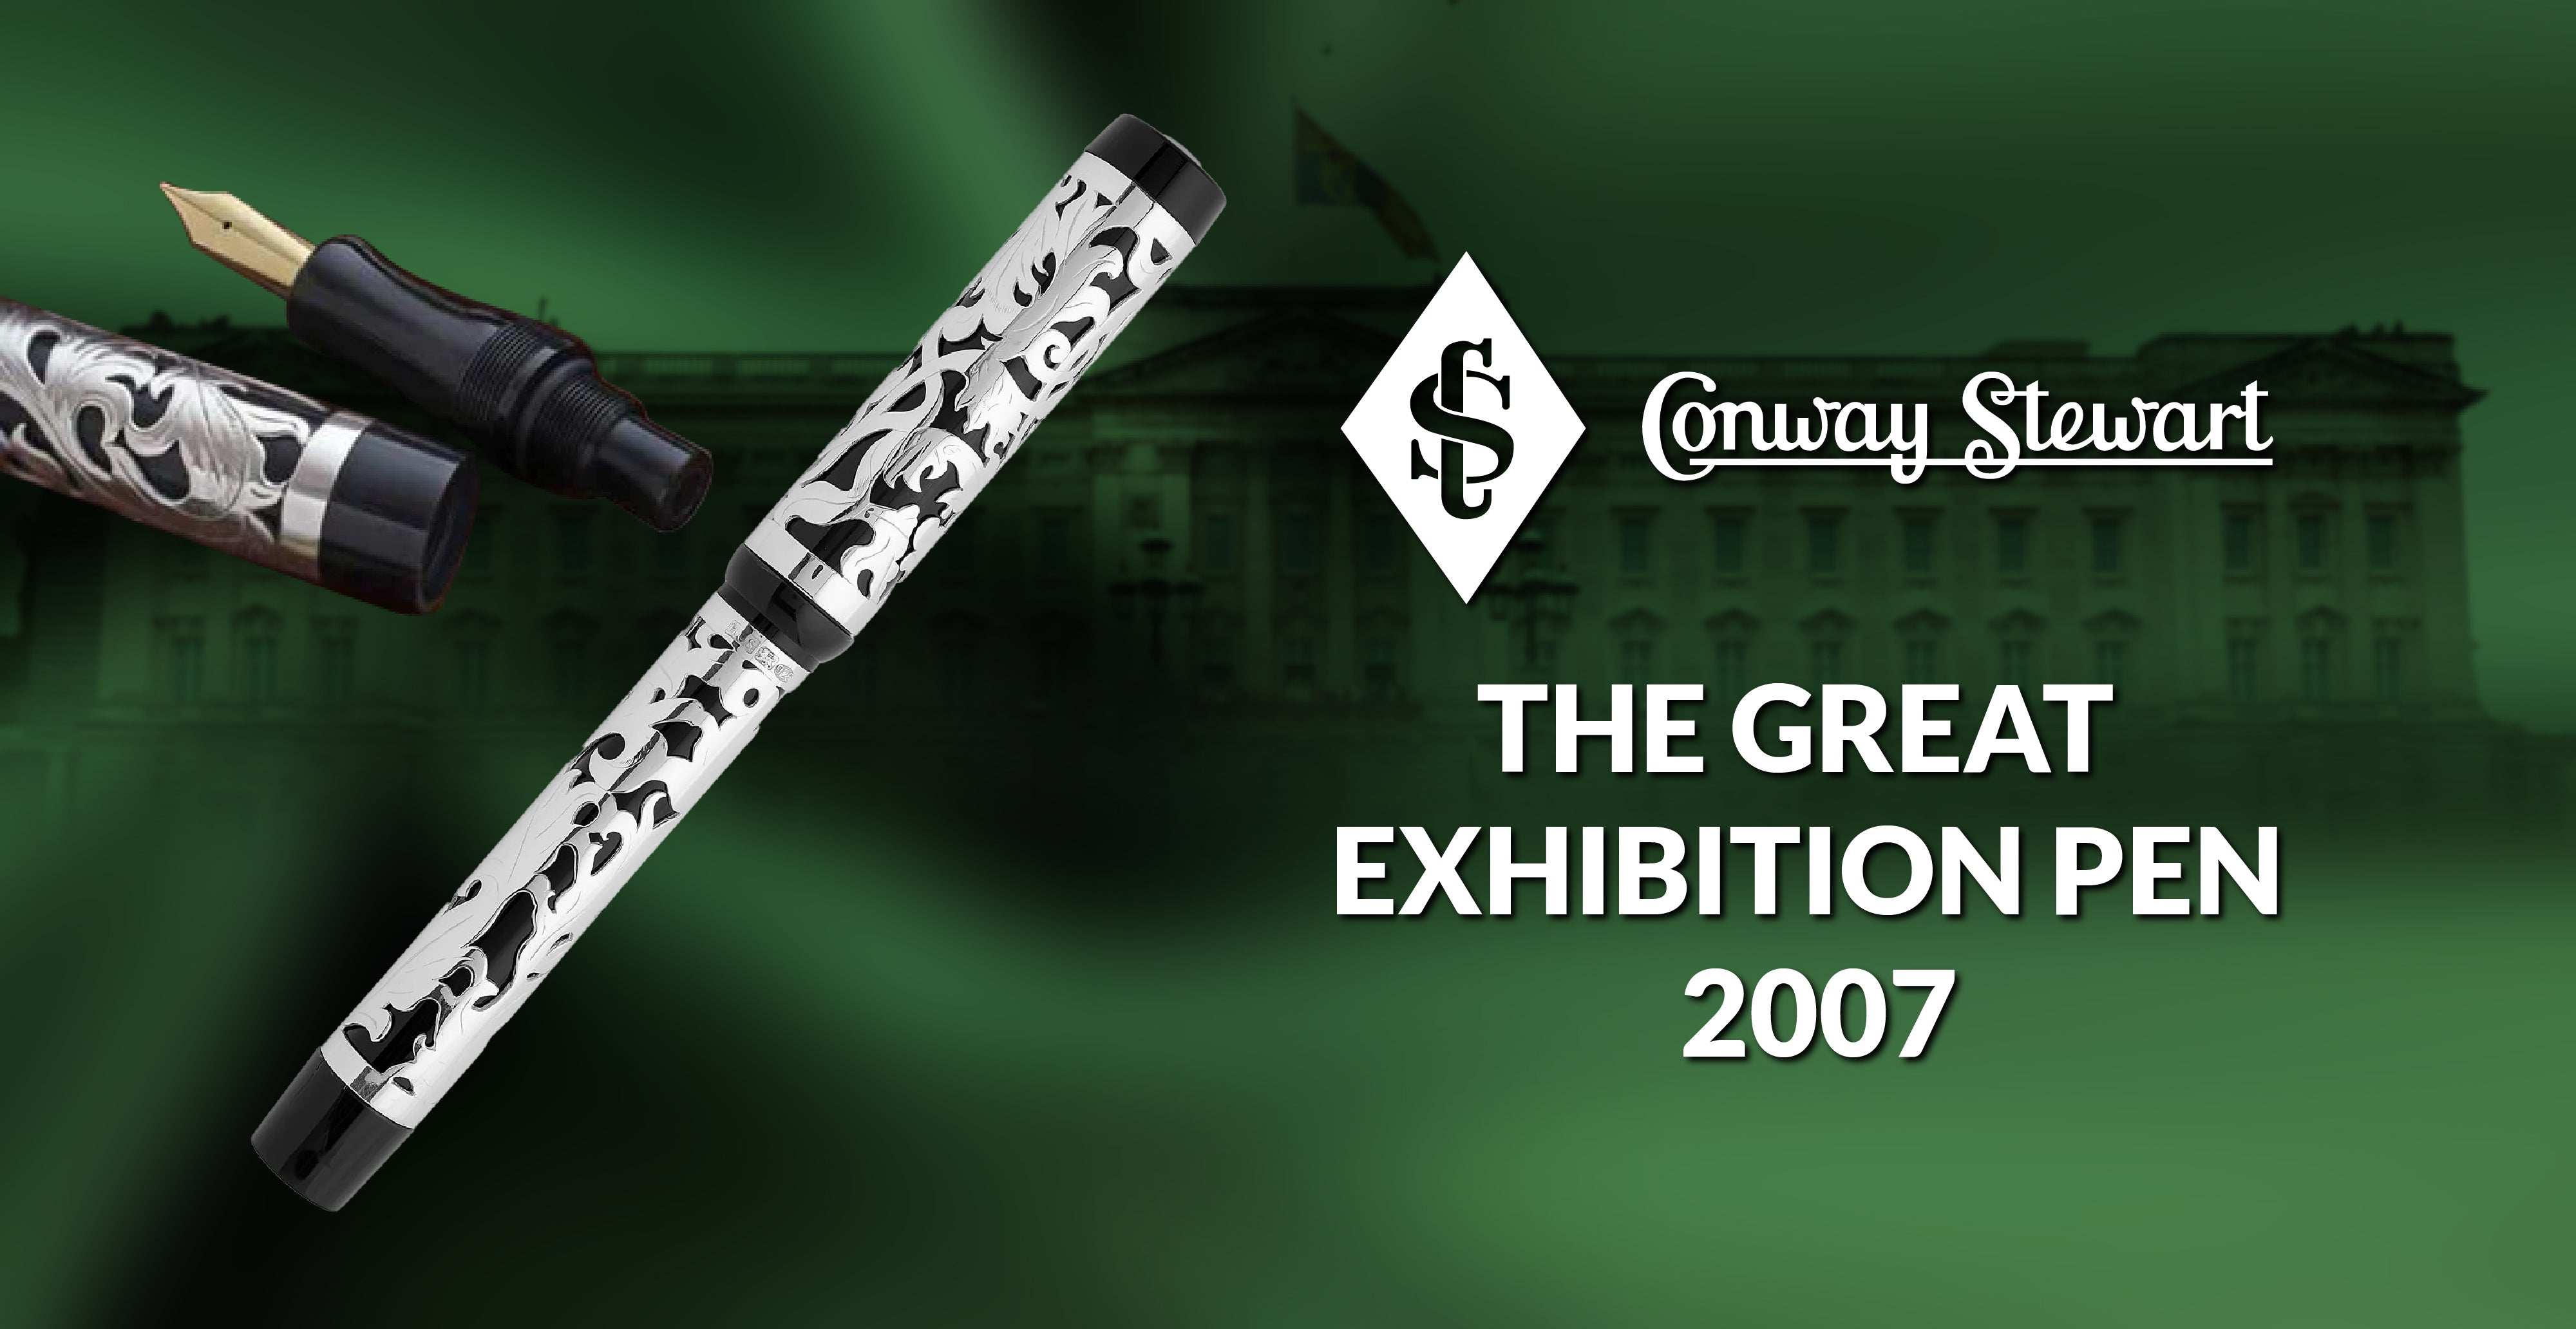 The Great Exhibition Pen, 2007